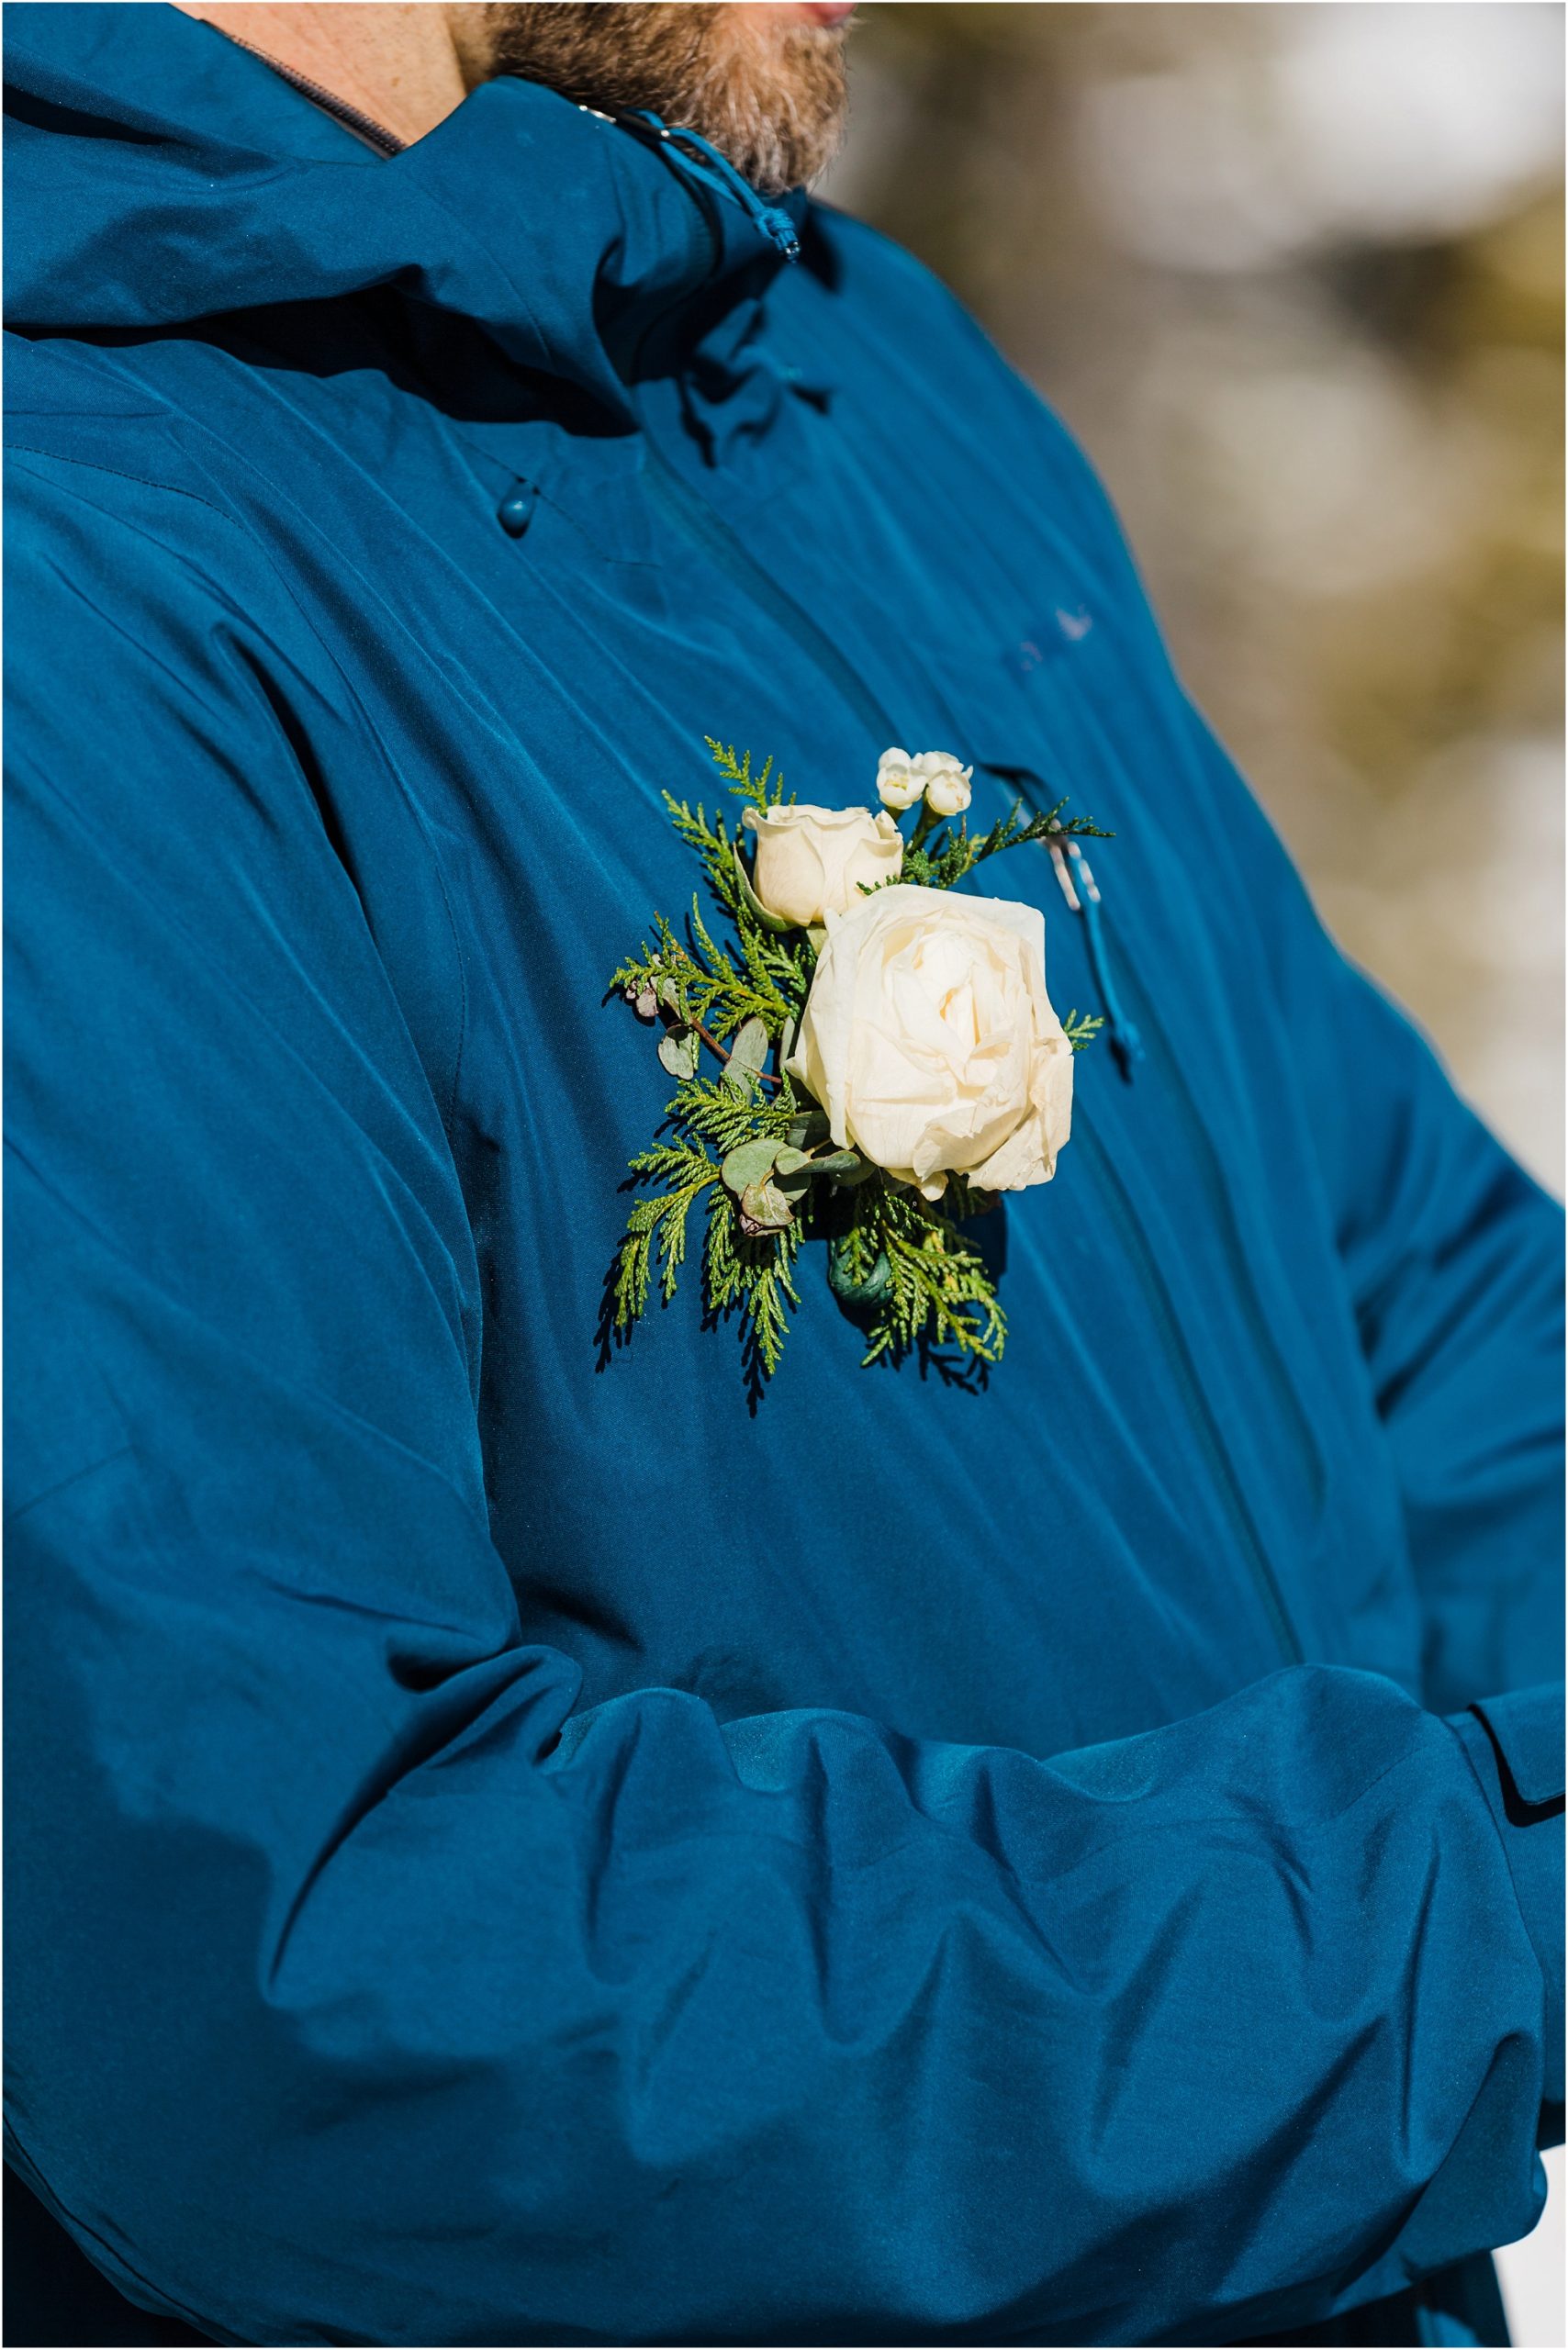 A groom wearing a cobalt blue ski jacket has a white rose and green pine bough boutonniere during his Mt Bachelor adventure elopement ceremony in Oregon. | Erica Swantek Photography